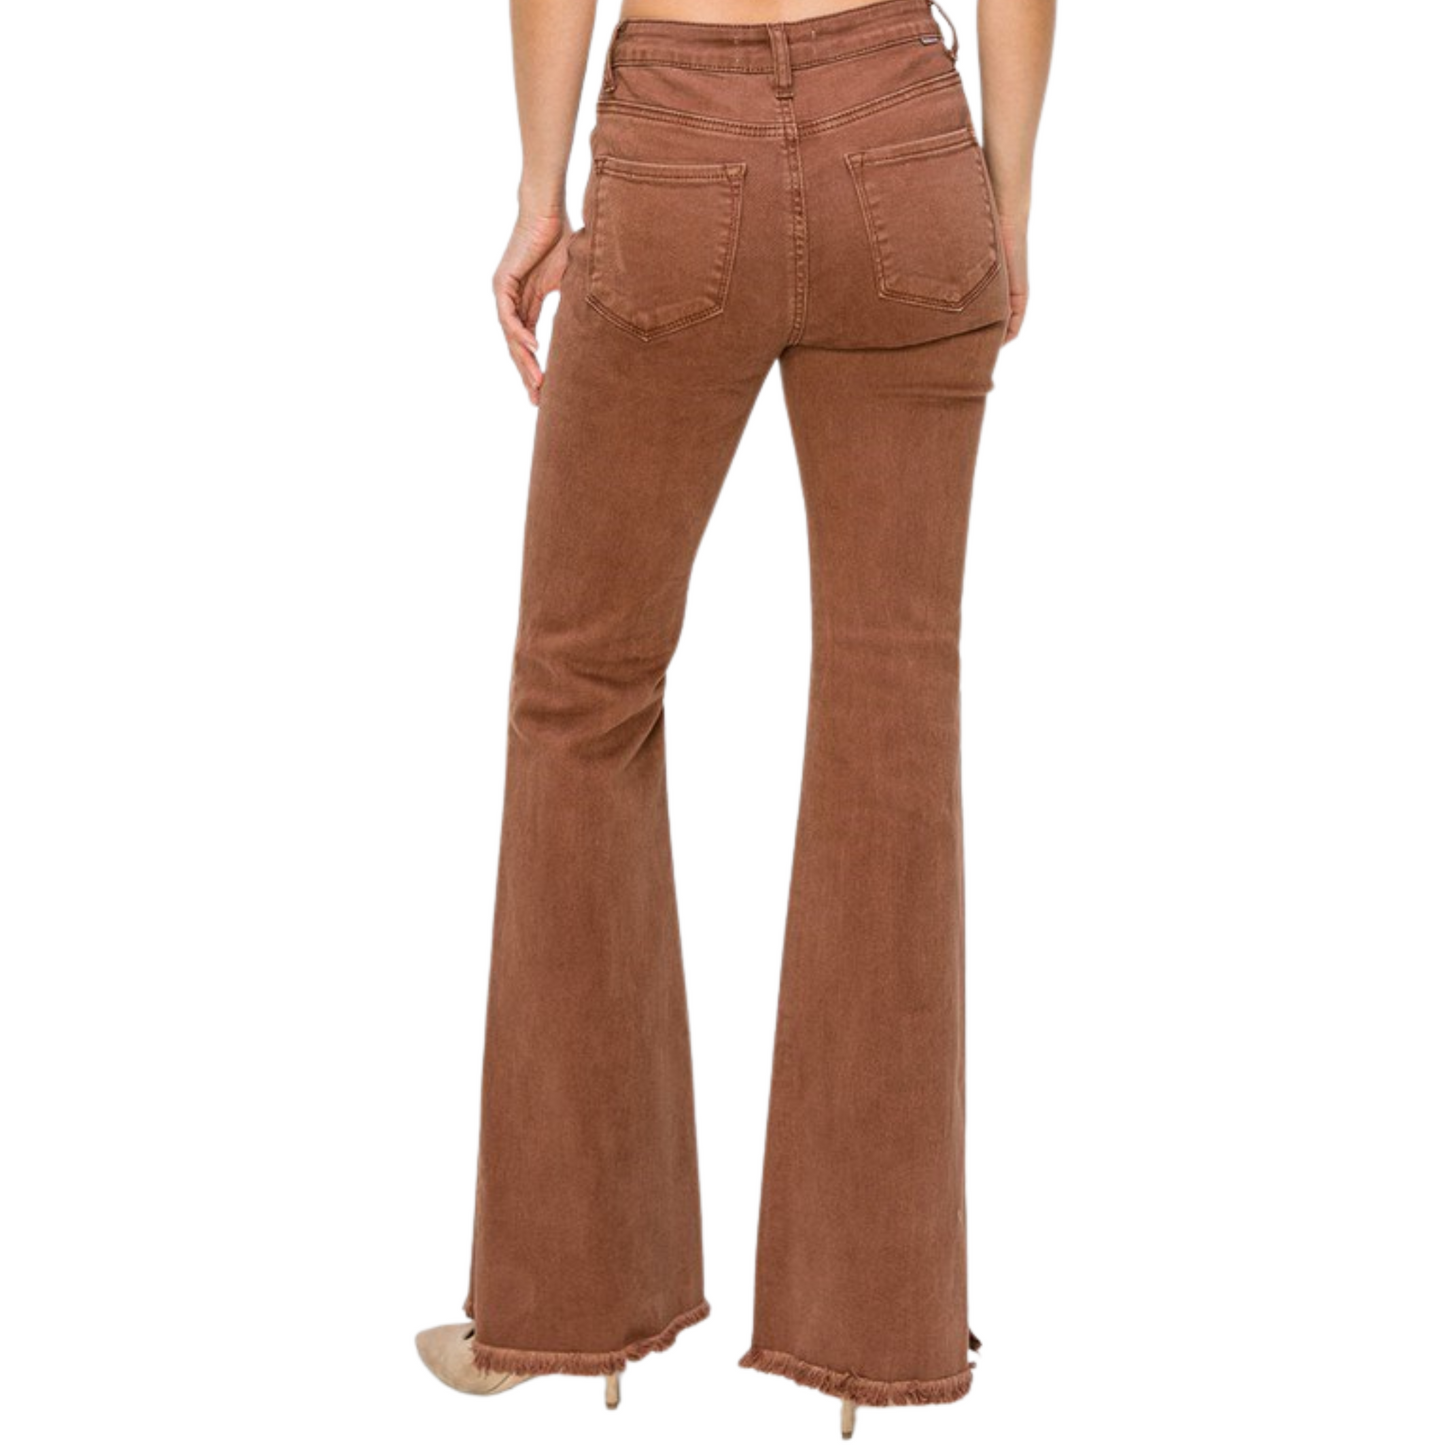 "These High Rise Side Split Flares by Risen offer a sophisticated look in an espresso color. The side slit adds stylish detail while the flare cut elongates and flatters the legs. Expertly crafted for a high-quality finish, perfect for any occasion."